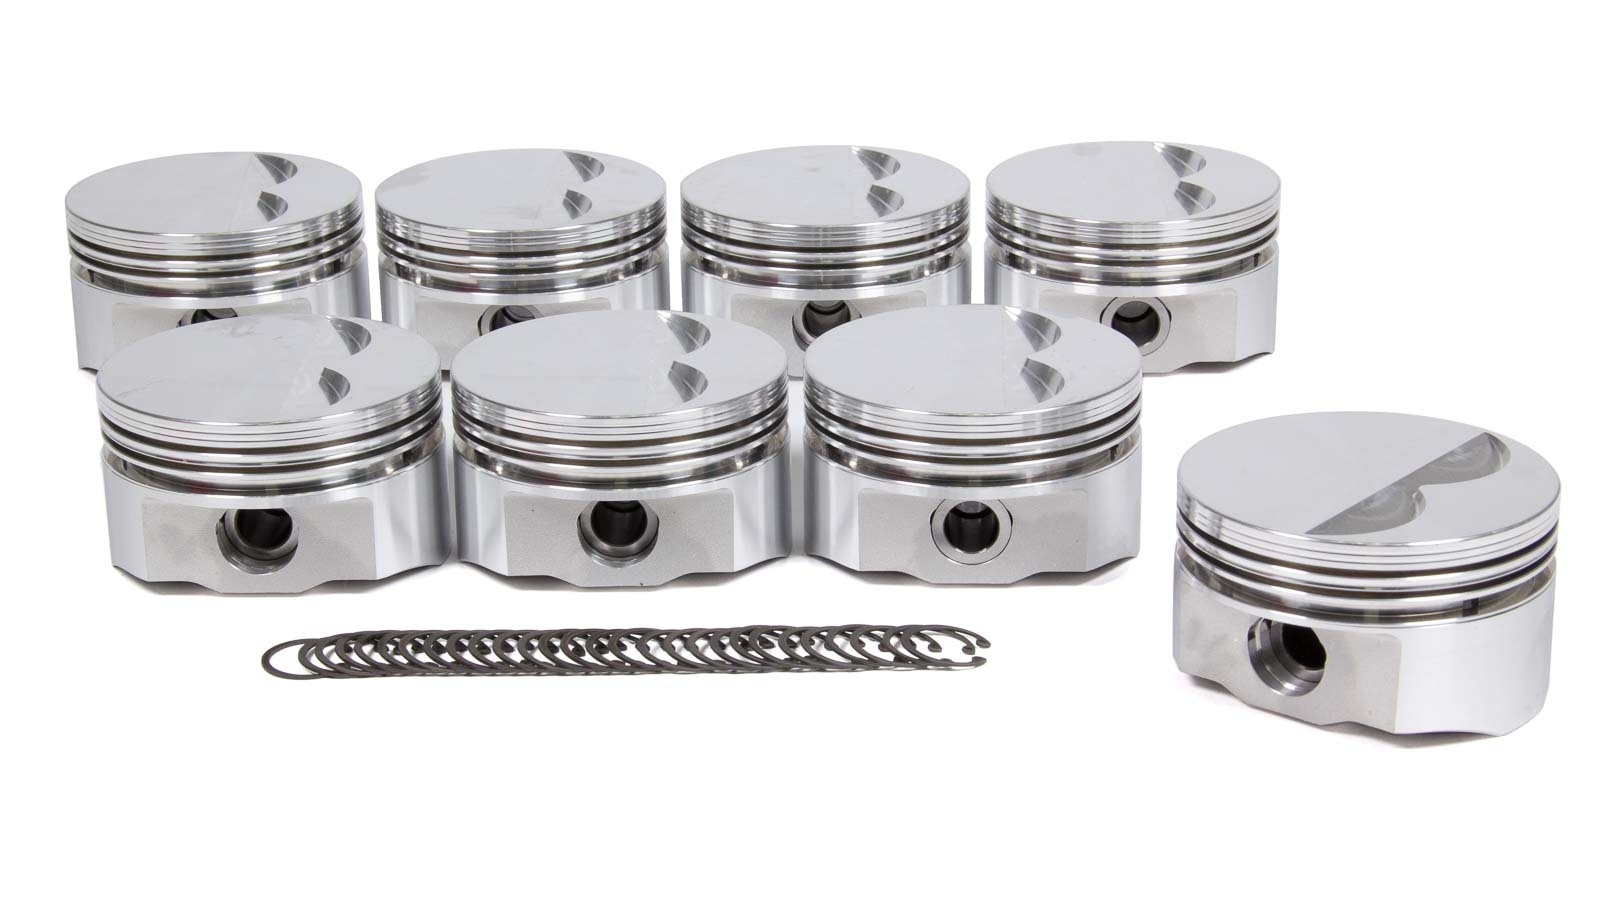 DSS Racing 8700-4040 Piston, E Series, Forged, 4.040 in Bore, 5/64 x 5/64 x 3/16 in Ring Grooves, Minus 5.00 cc, Small Block Chevy, Set of 8